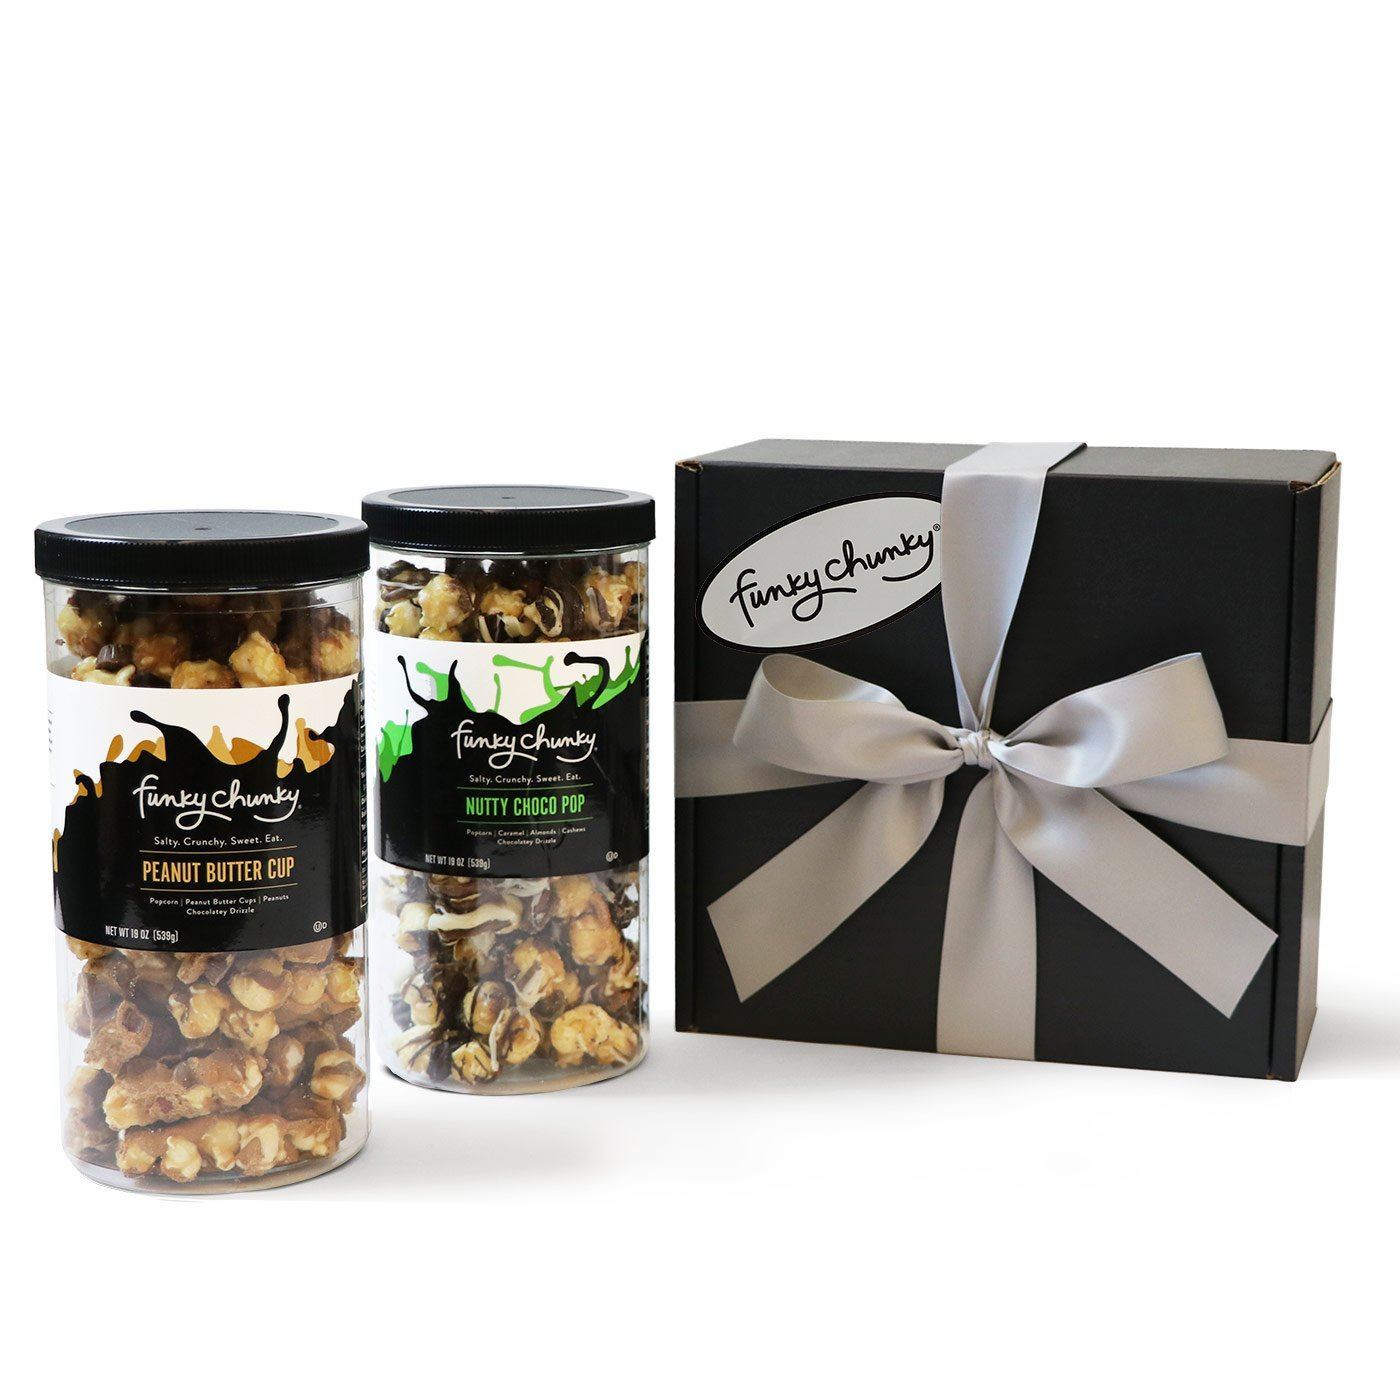 Salty + Sweet Care Package-Choose two of their favorite Funky Chunky snack flavors for a Salty + Sweet care package that's hard to resist. Give this care package as a perk to employees, clients, friends or family near and far.-Funky Chunky